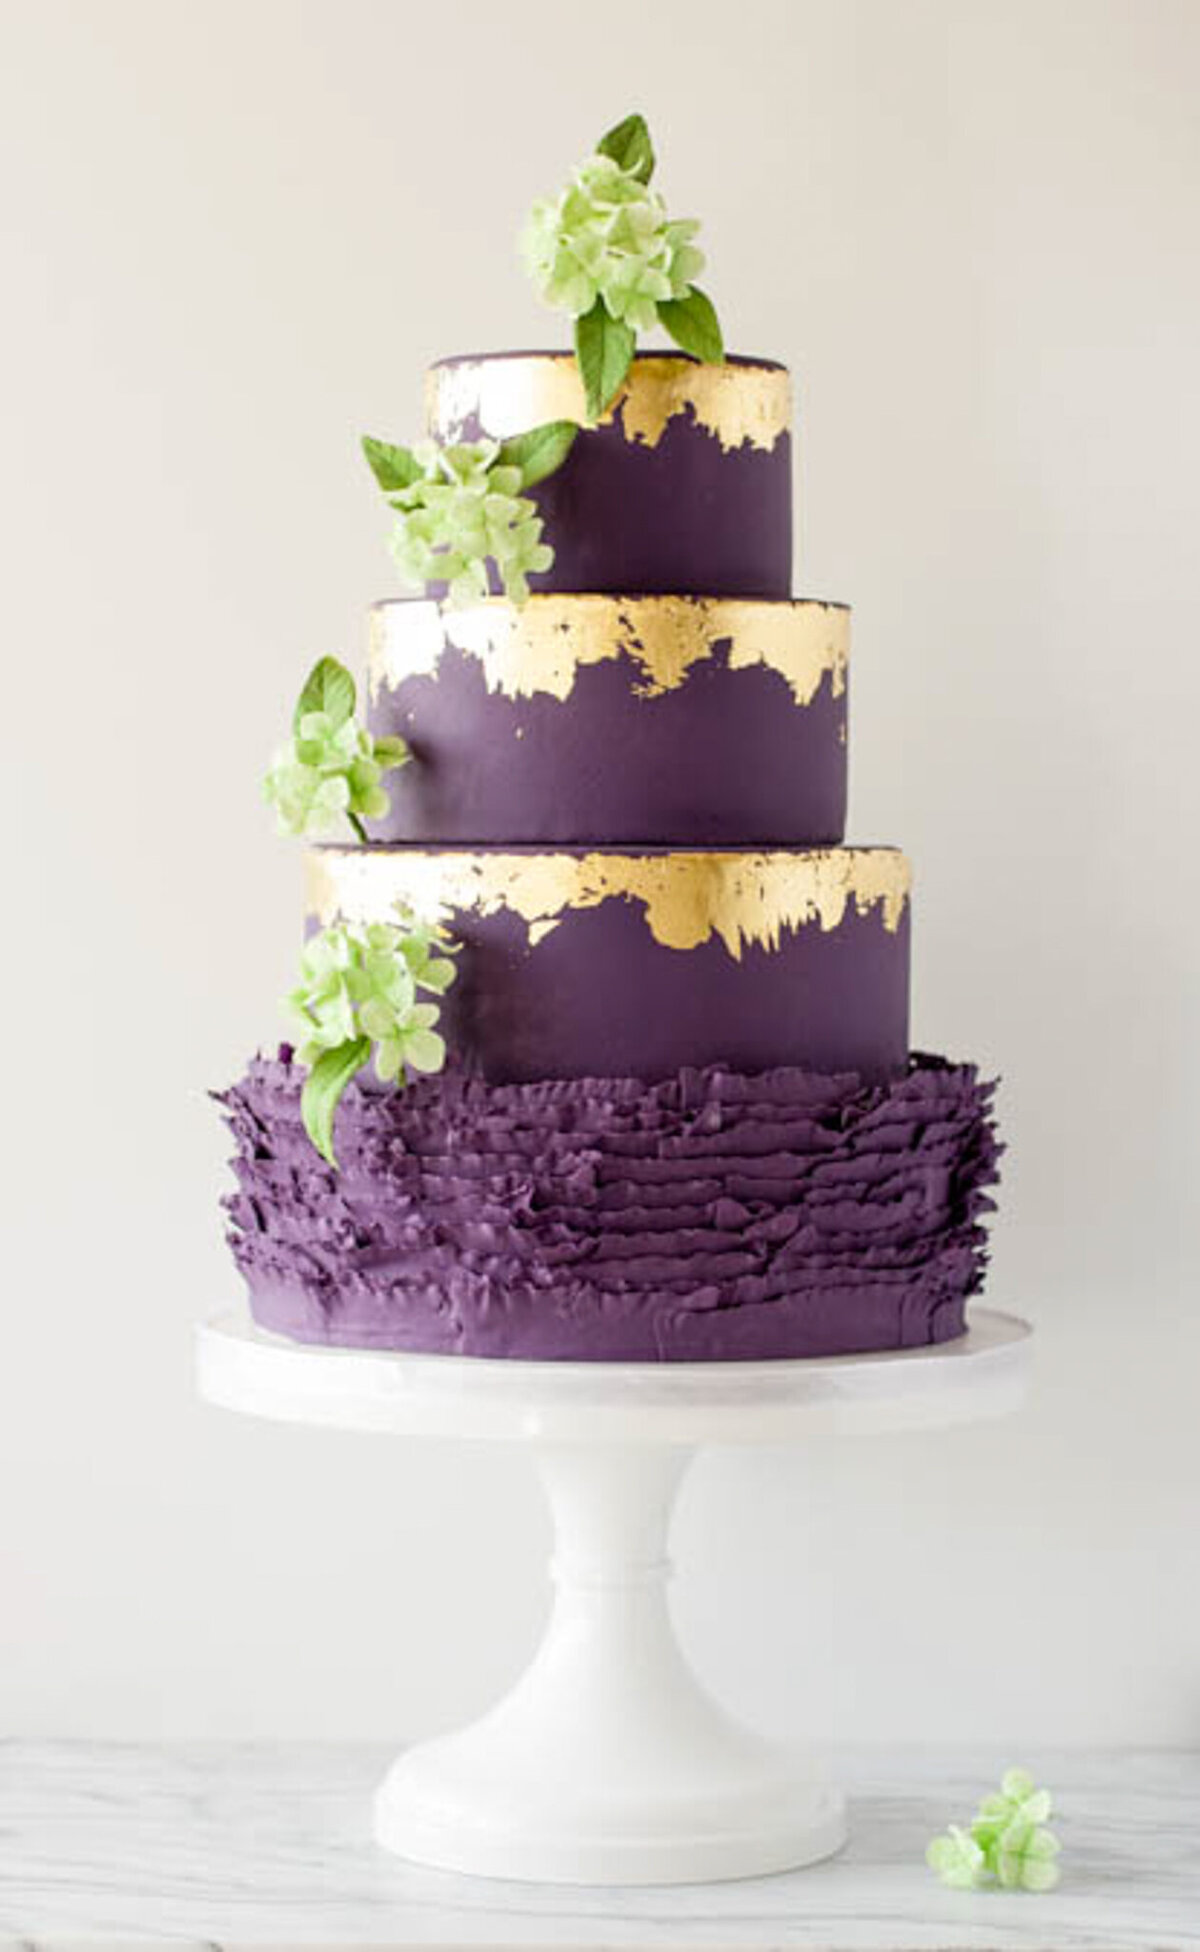 Creative purple wedding cake, decorated with gold leaf foil detail and hand crafted sugar florals, created by Brianne Gabrielle Cakes,  elegant cakes & desserts in Edmonton, AB, featured on the Brontë Bride Vendor Guide.